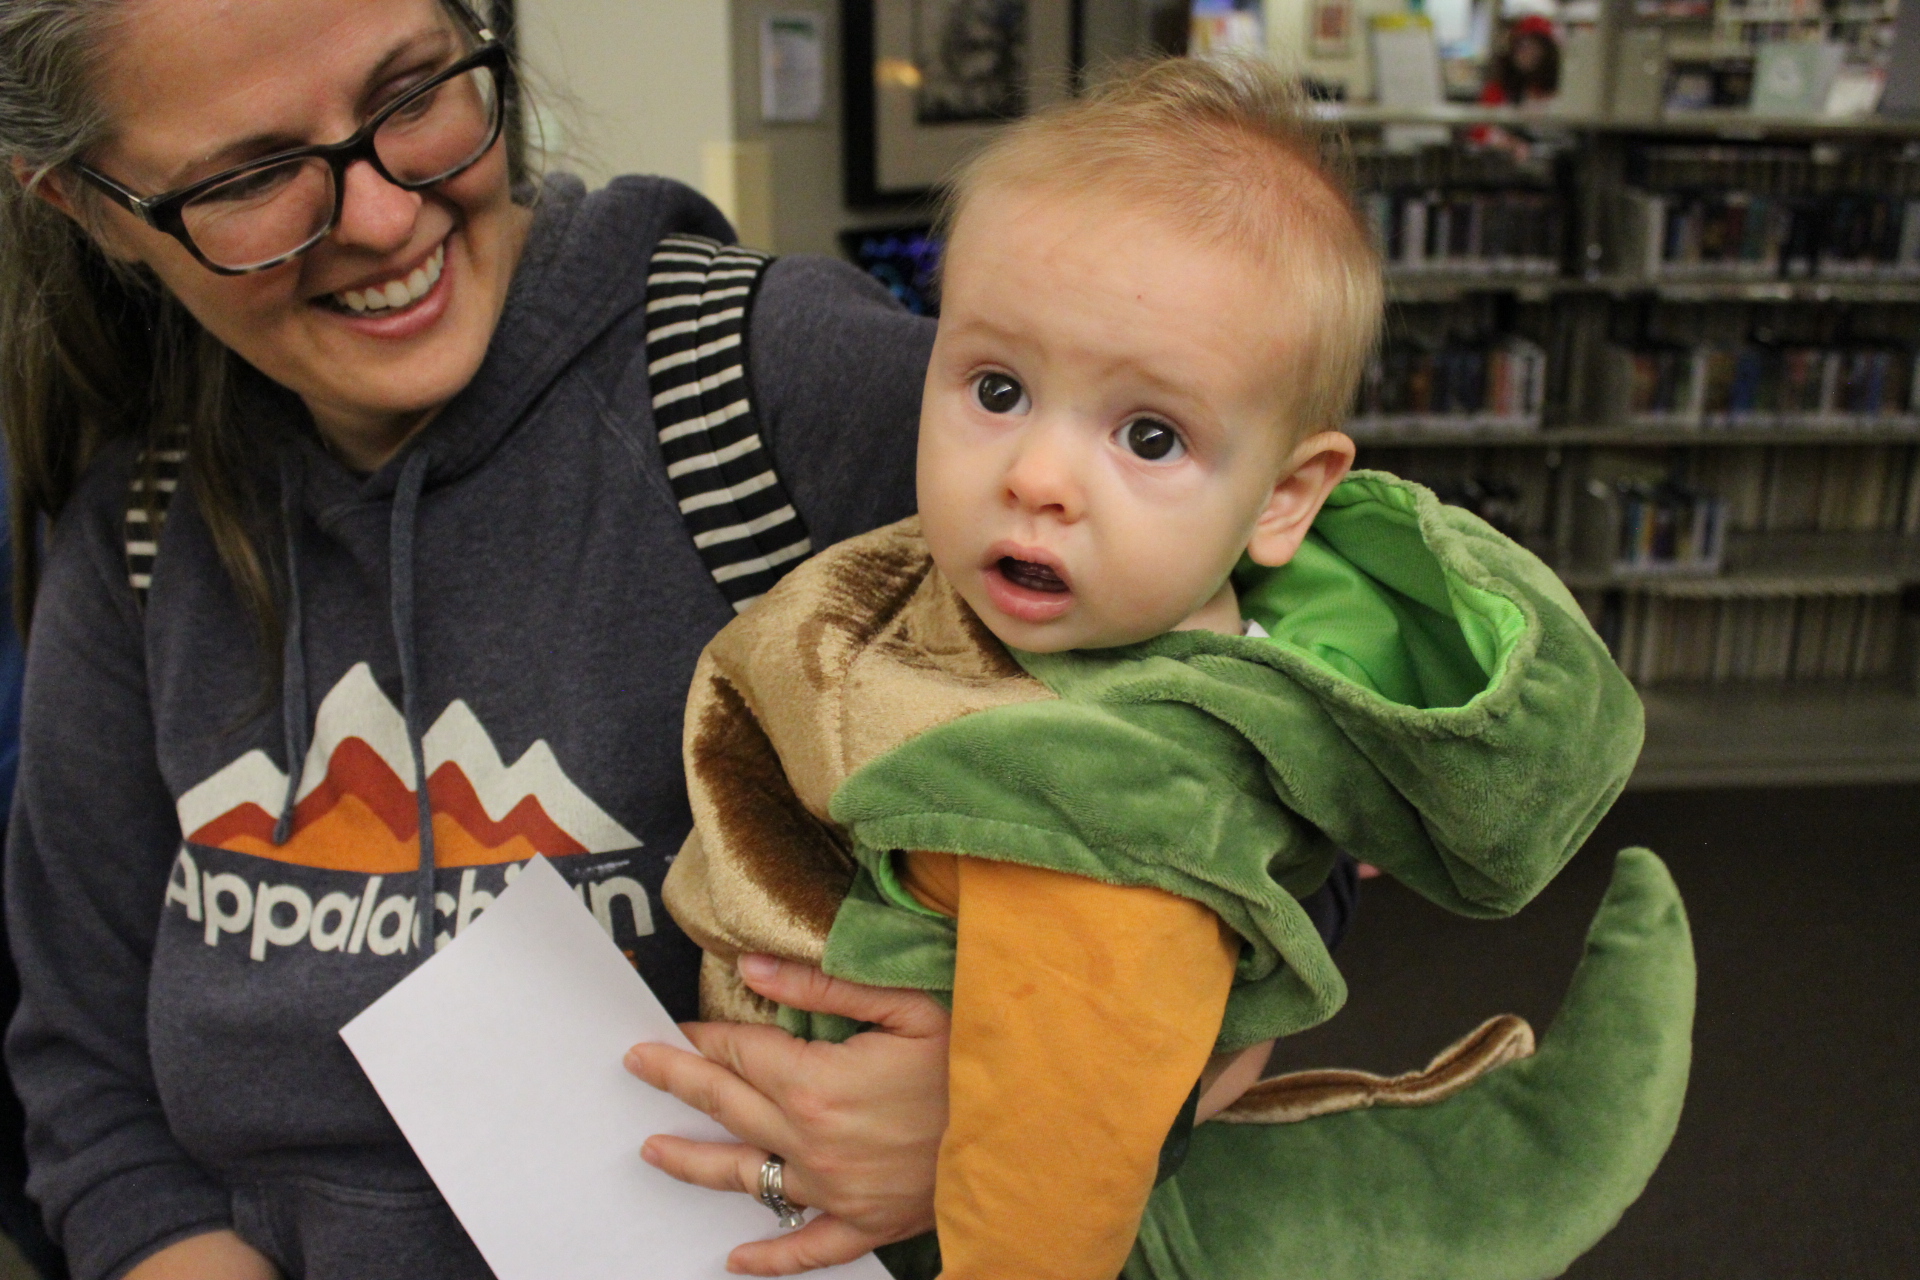 Library patron holding baby dressed as dragon